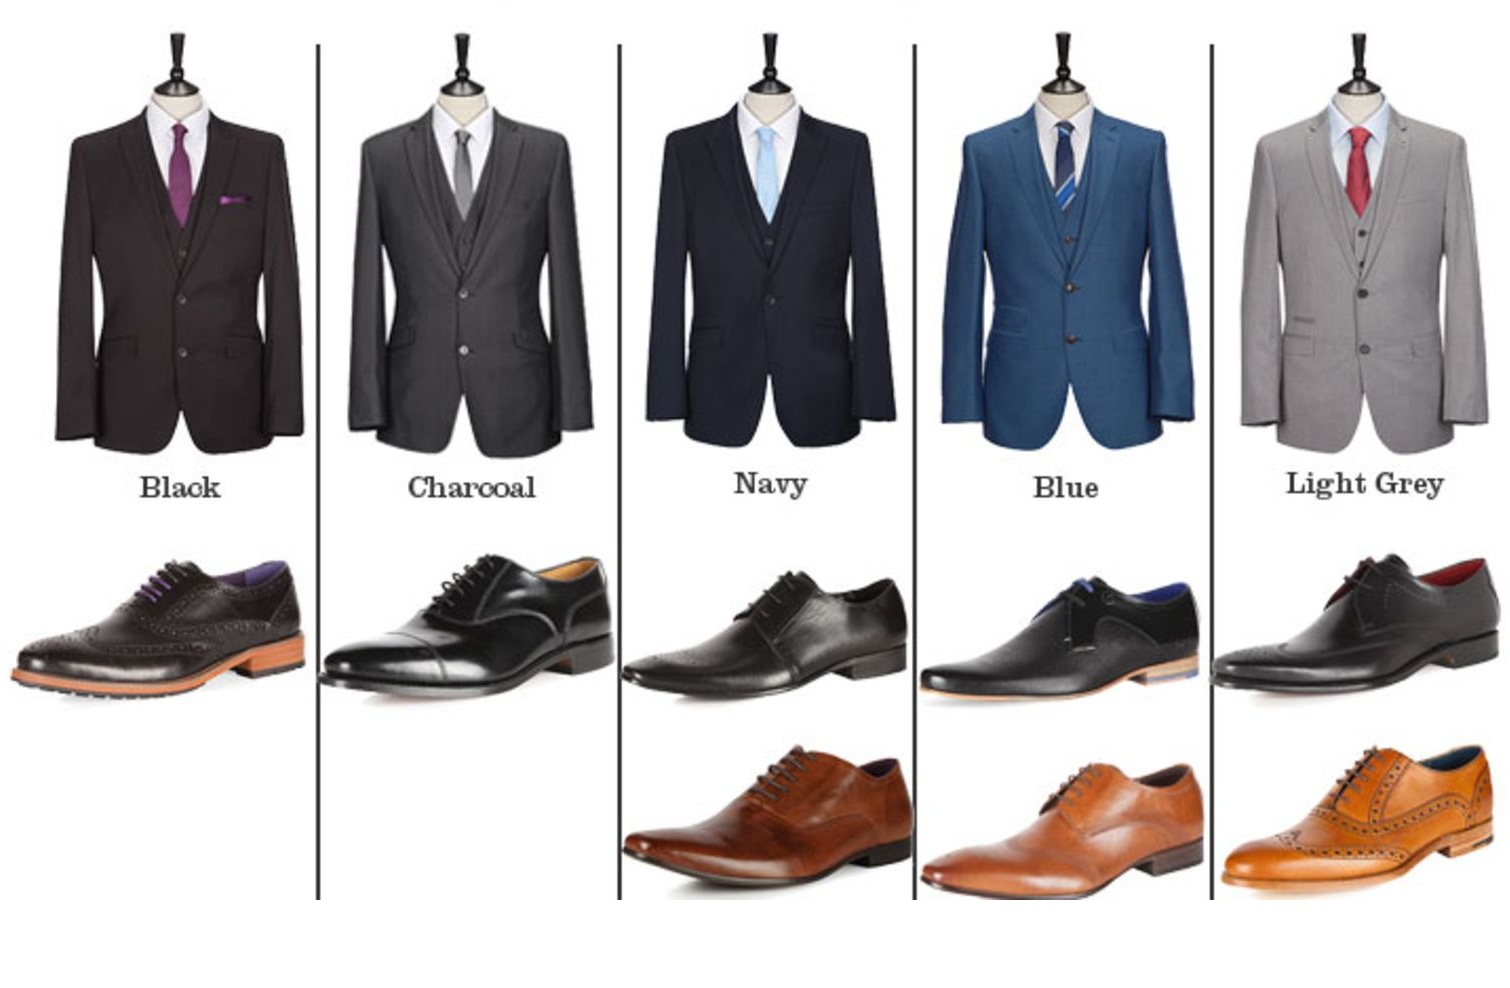 shoes to go with light grey suit